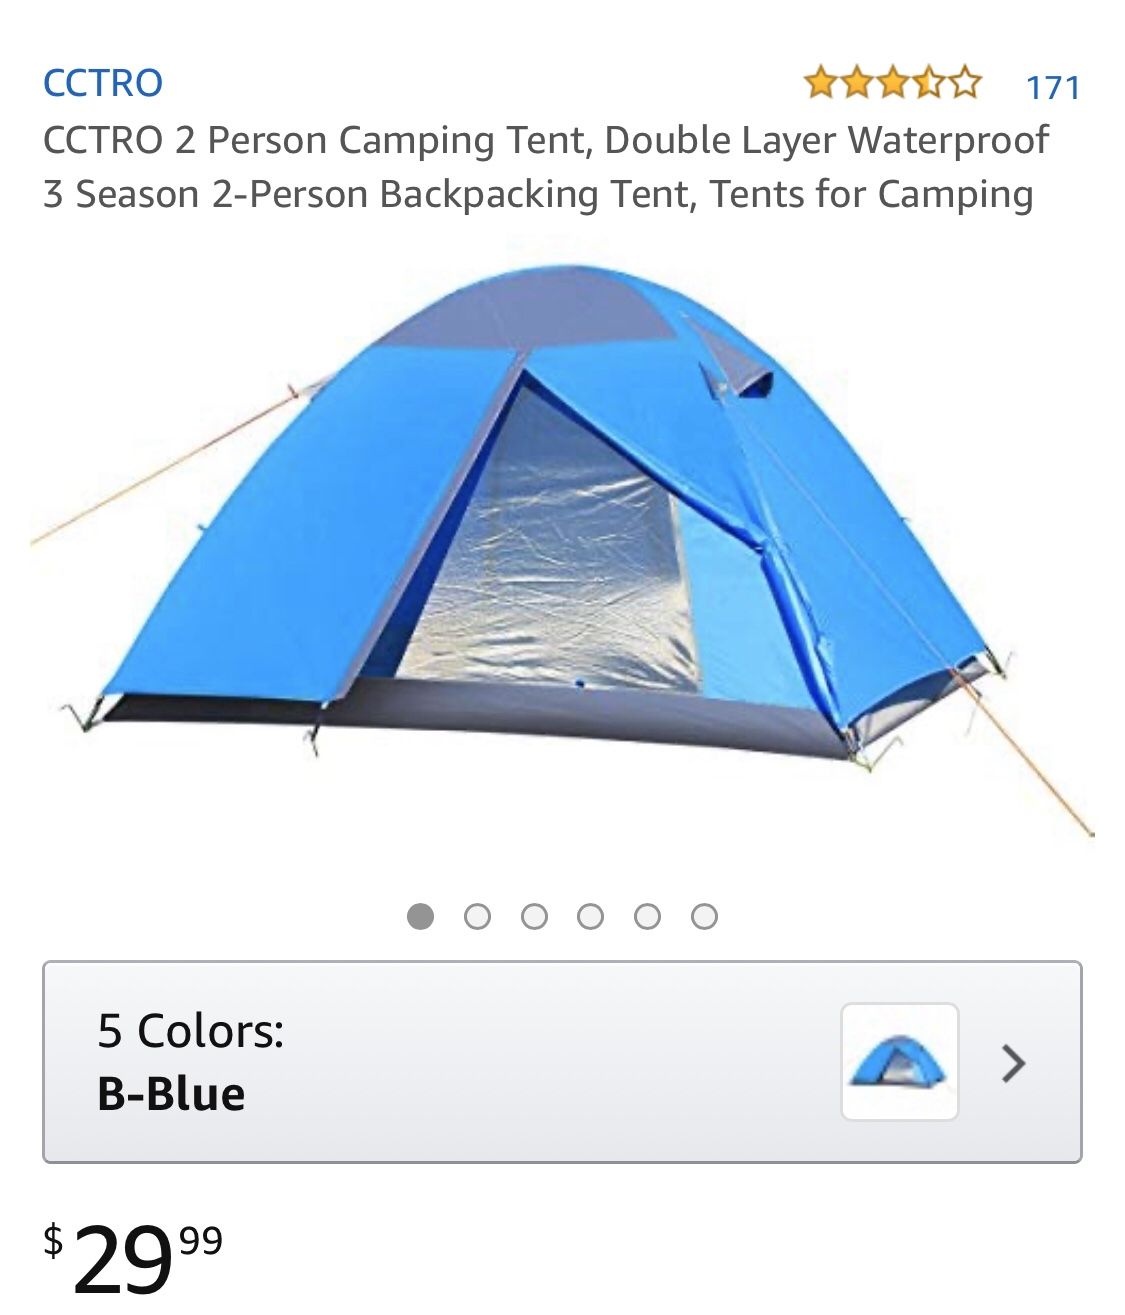 Cctro 2 person camping tents, double layer waterproof 3 season 2 person backpacking tents , tents for camping and hiking - brand new